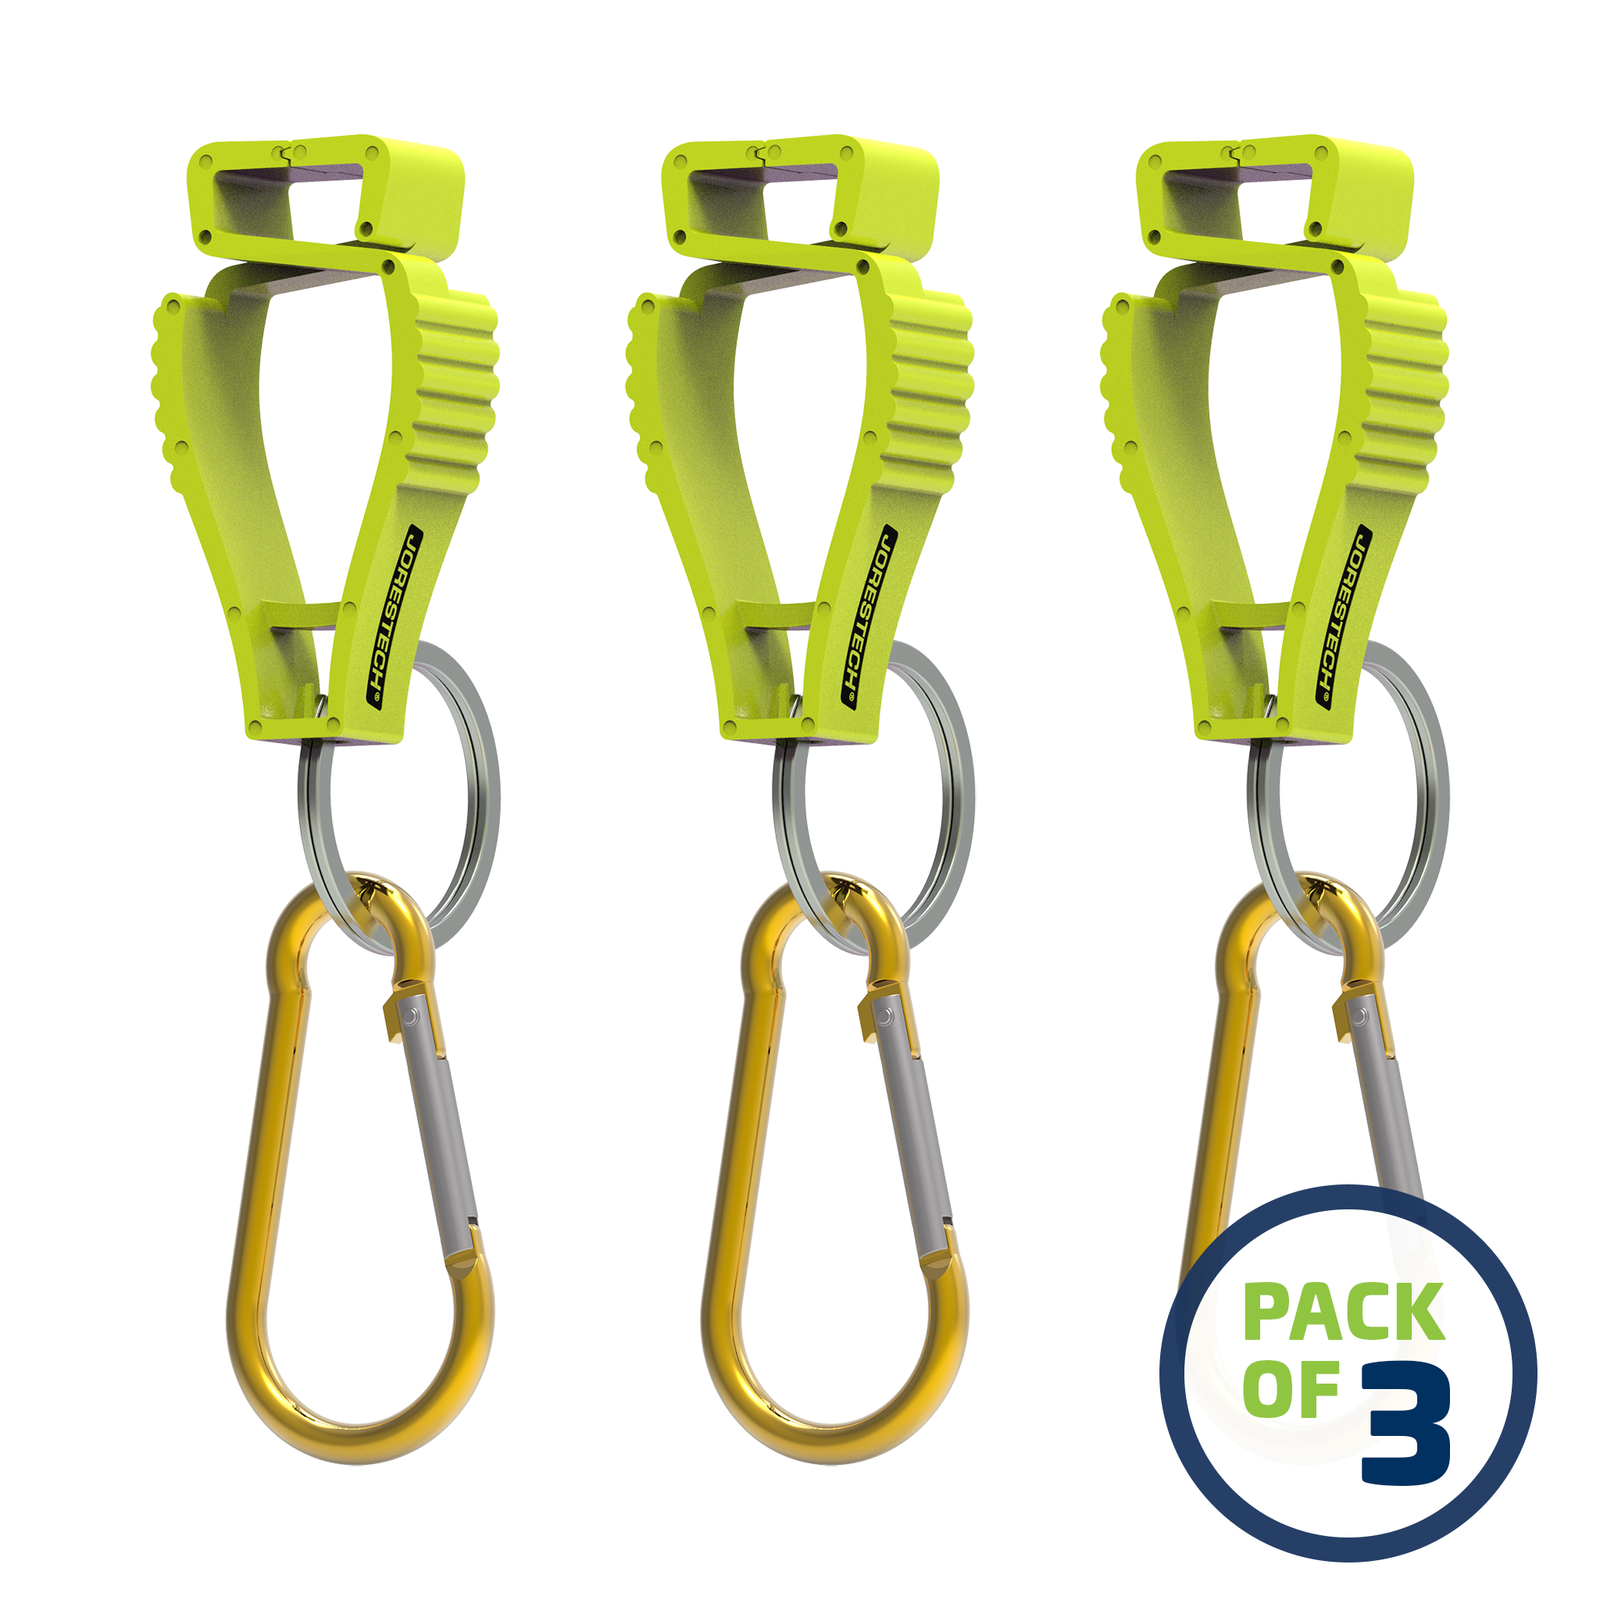 image of a pack of 3 Lime JORESTECH glove clip safety holders with carabiner over white background